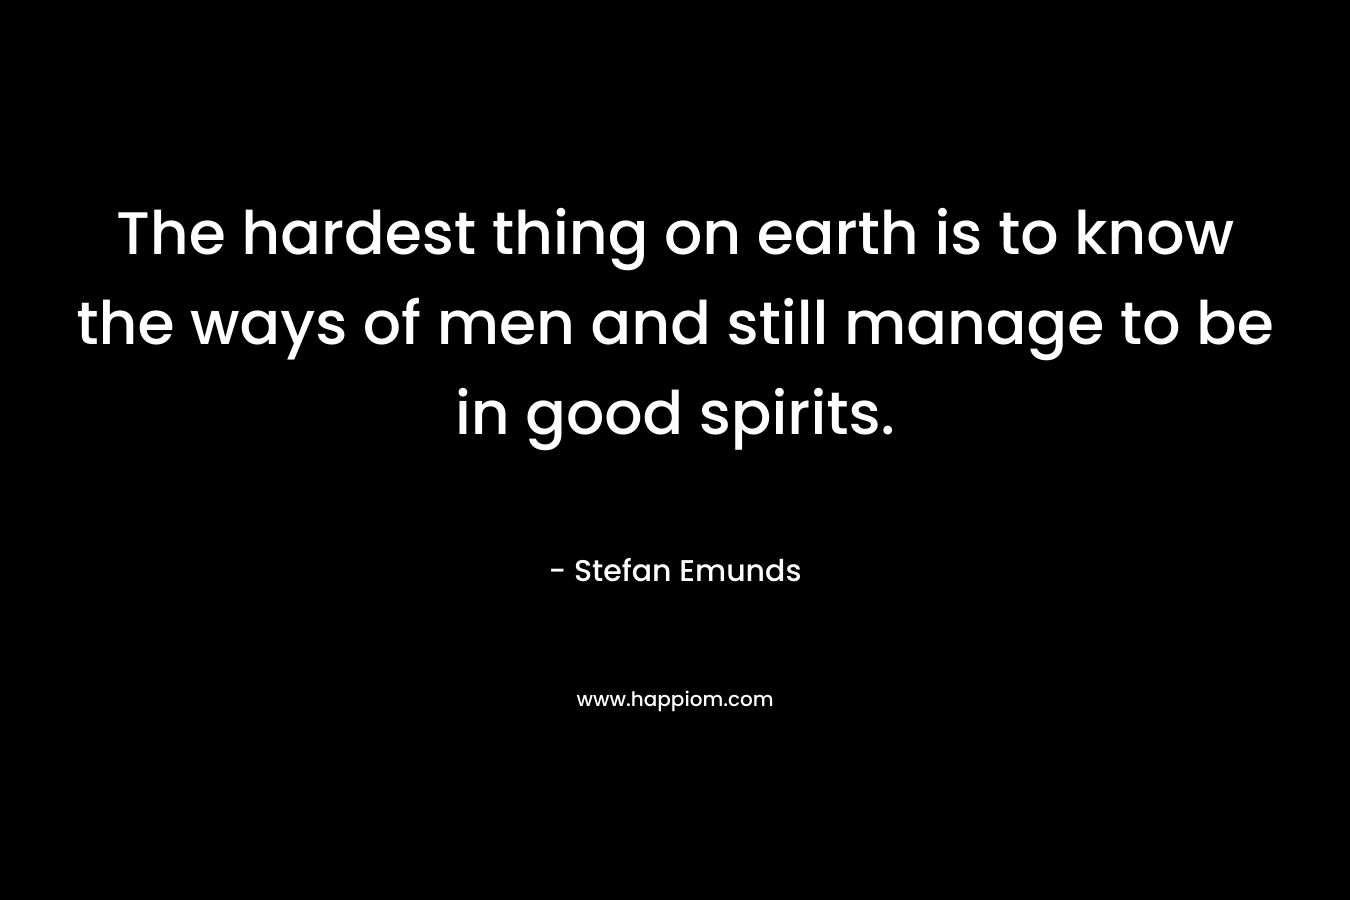 The hardest thing on earth is to know the ways of men and still manage to be in good spirits.